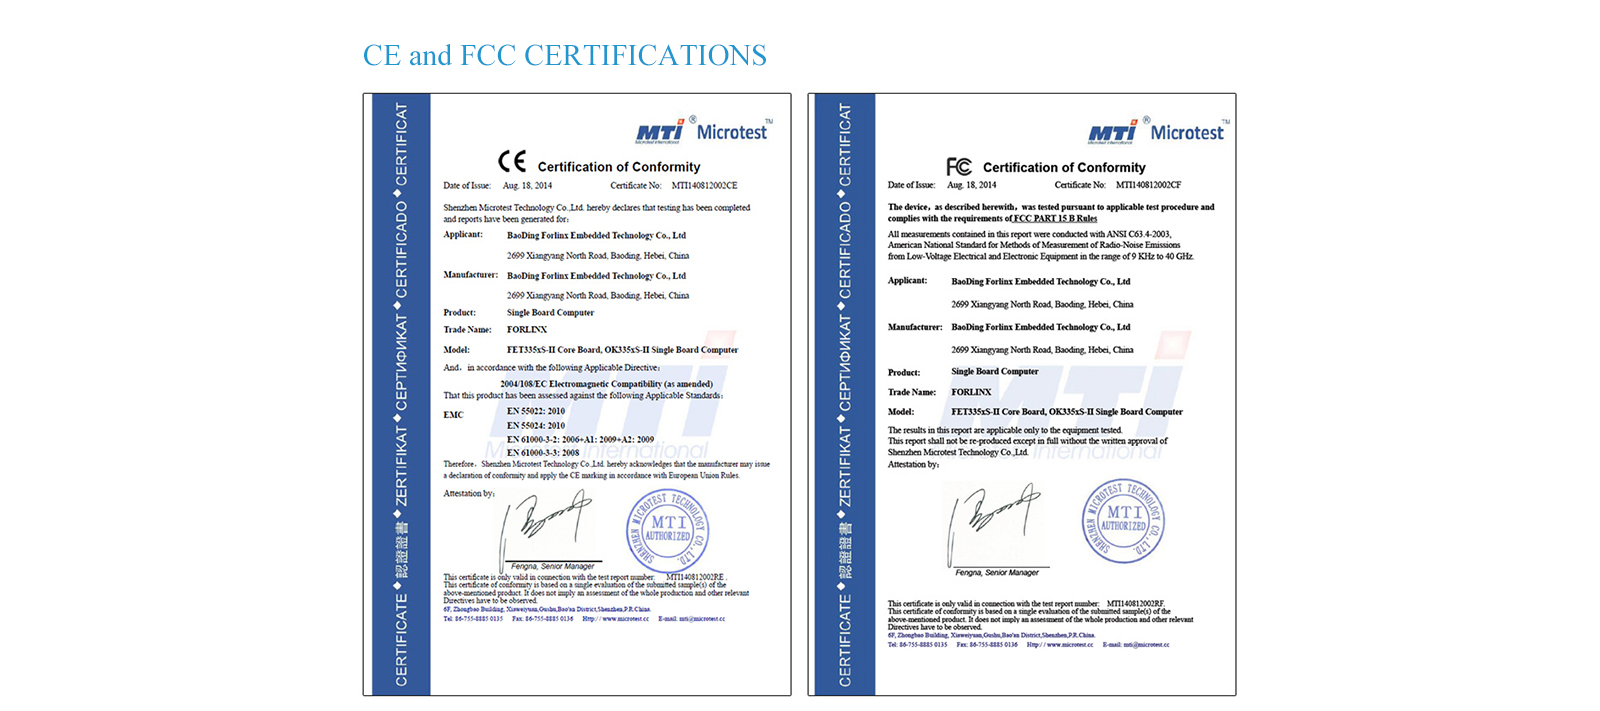 CE and FCC certification